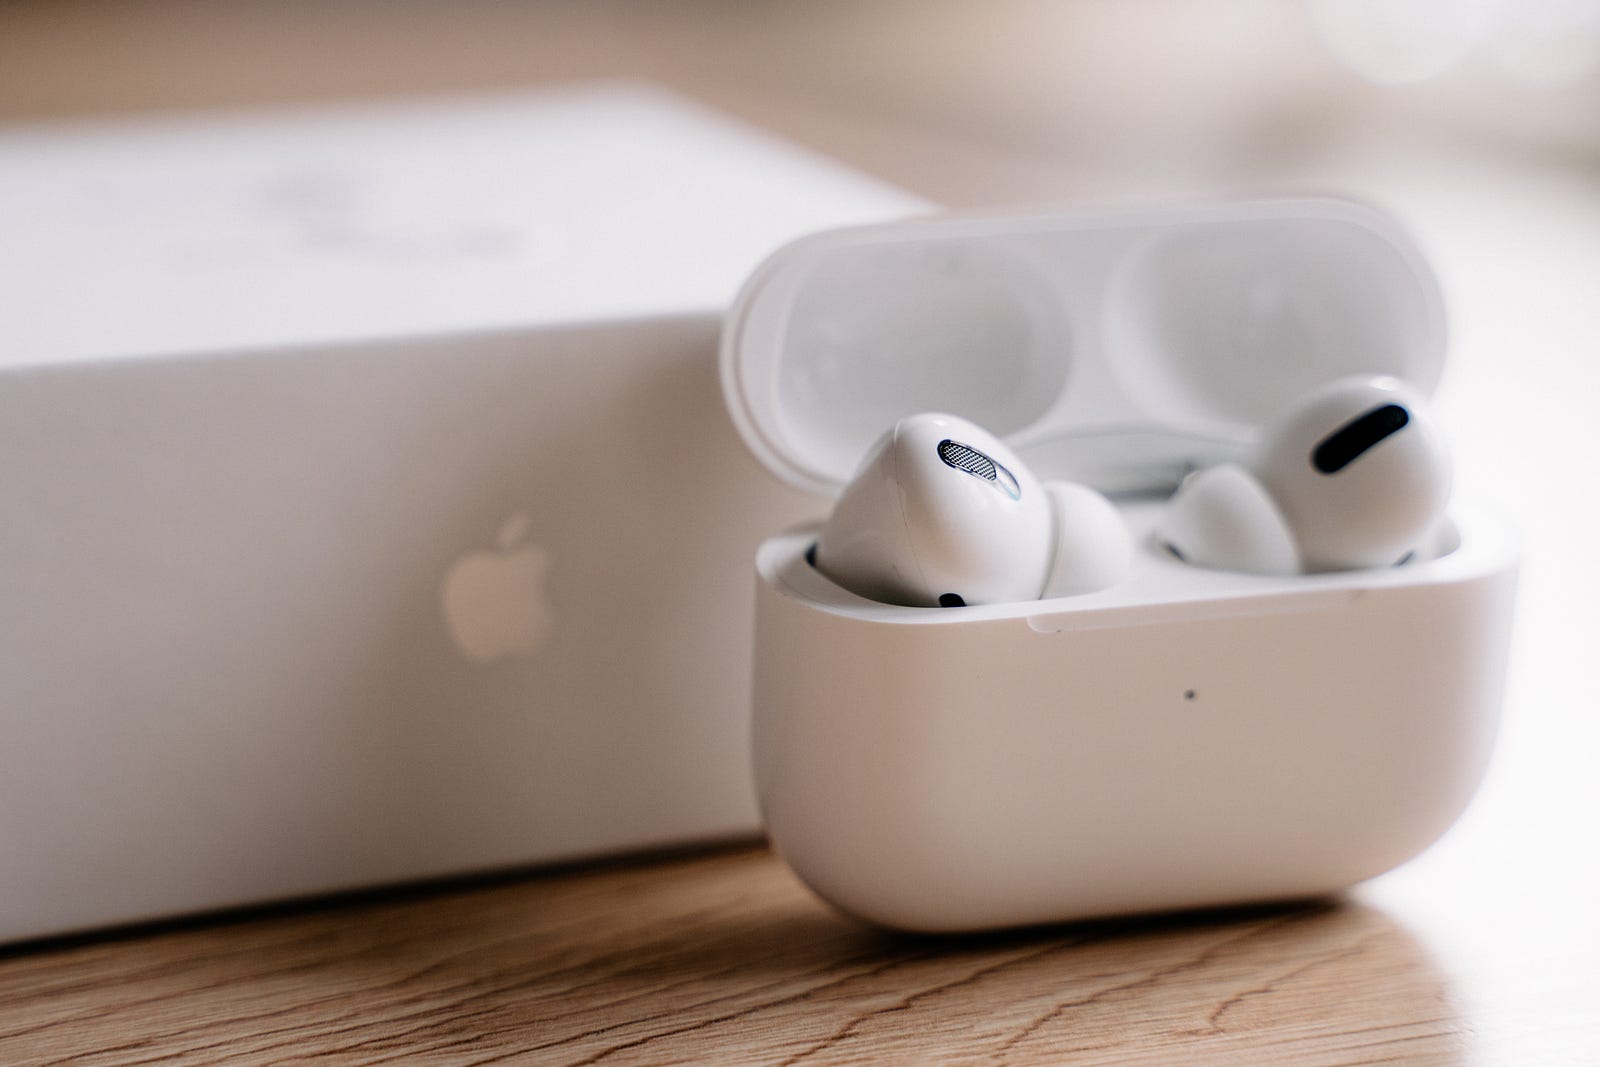 Airpods Pro 2 image next to it's packaging